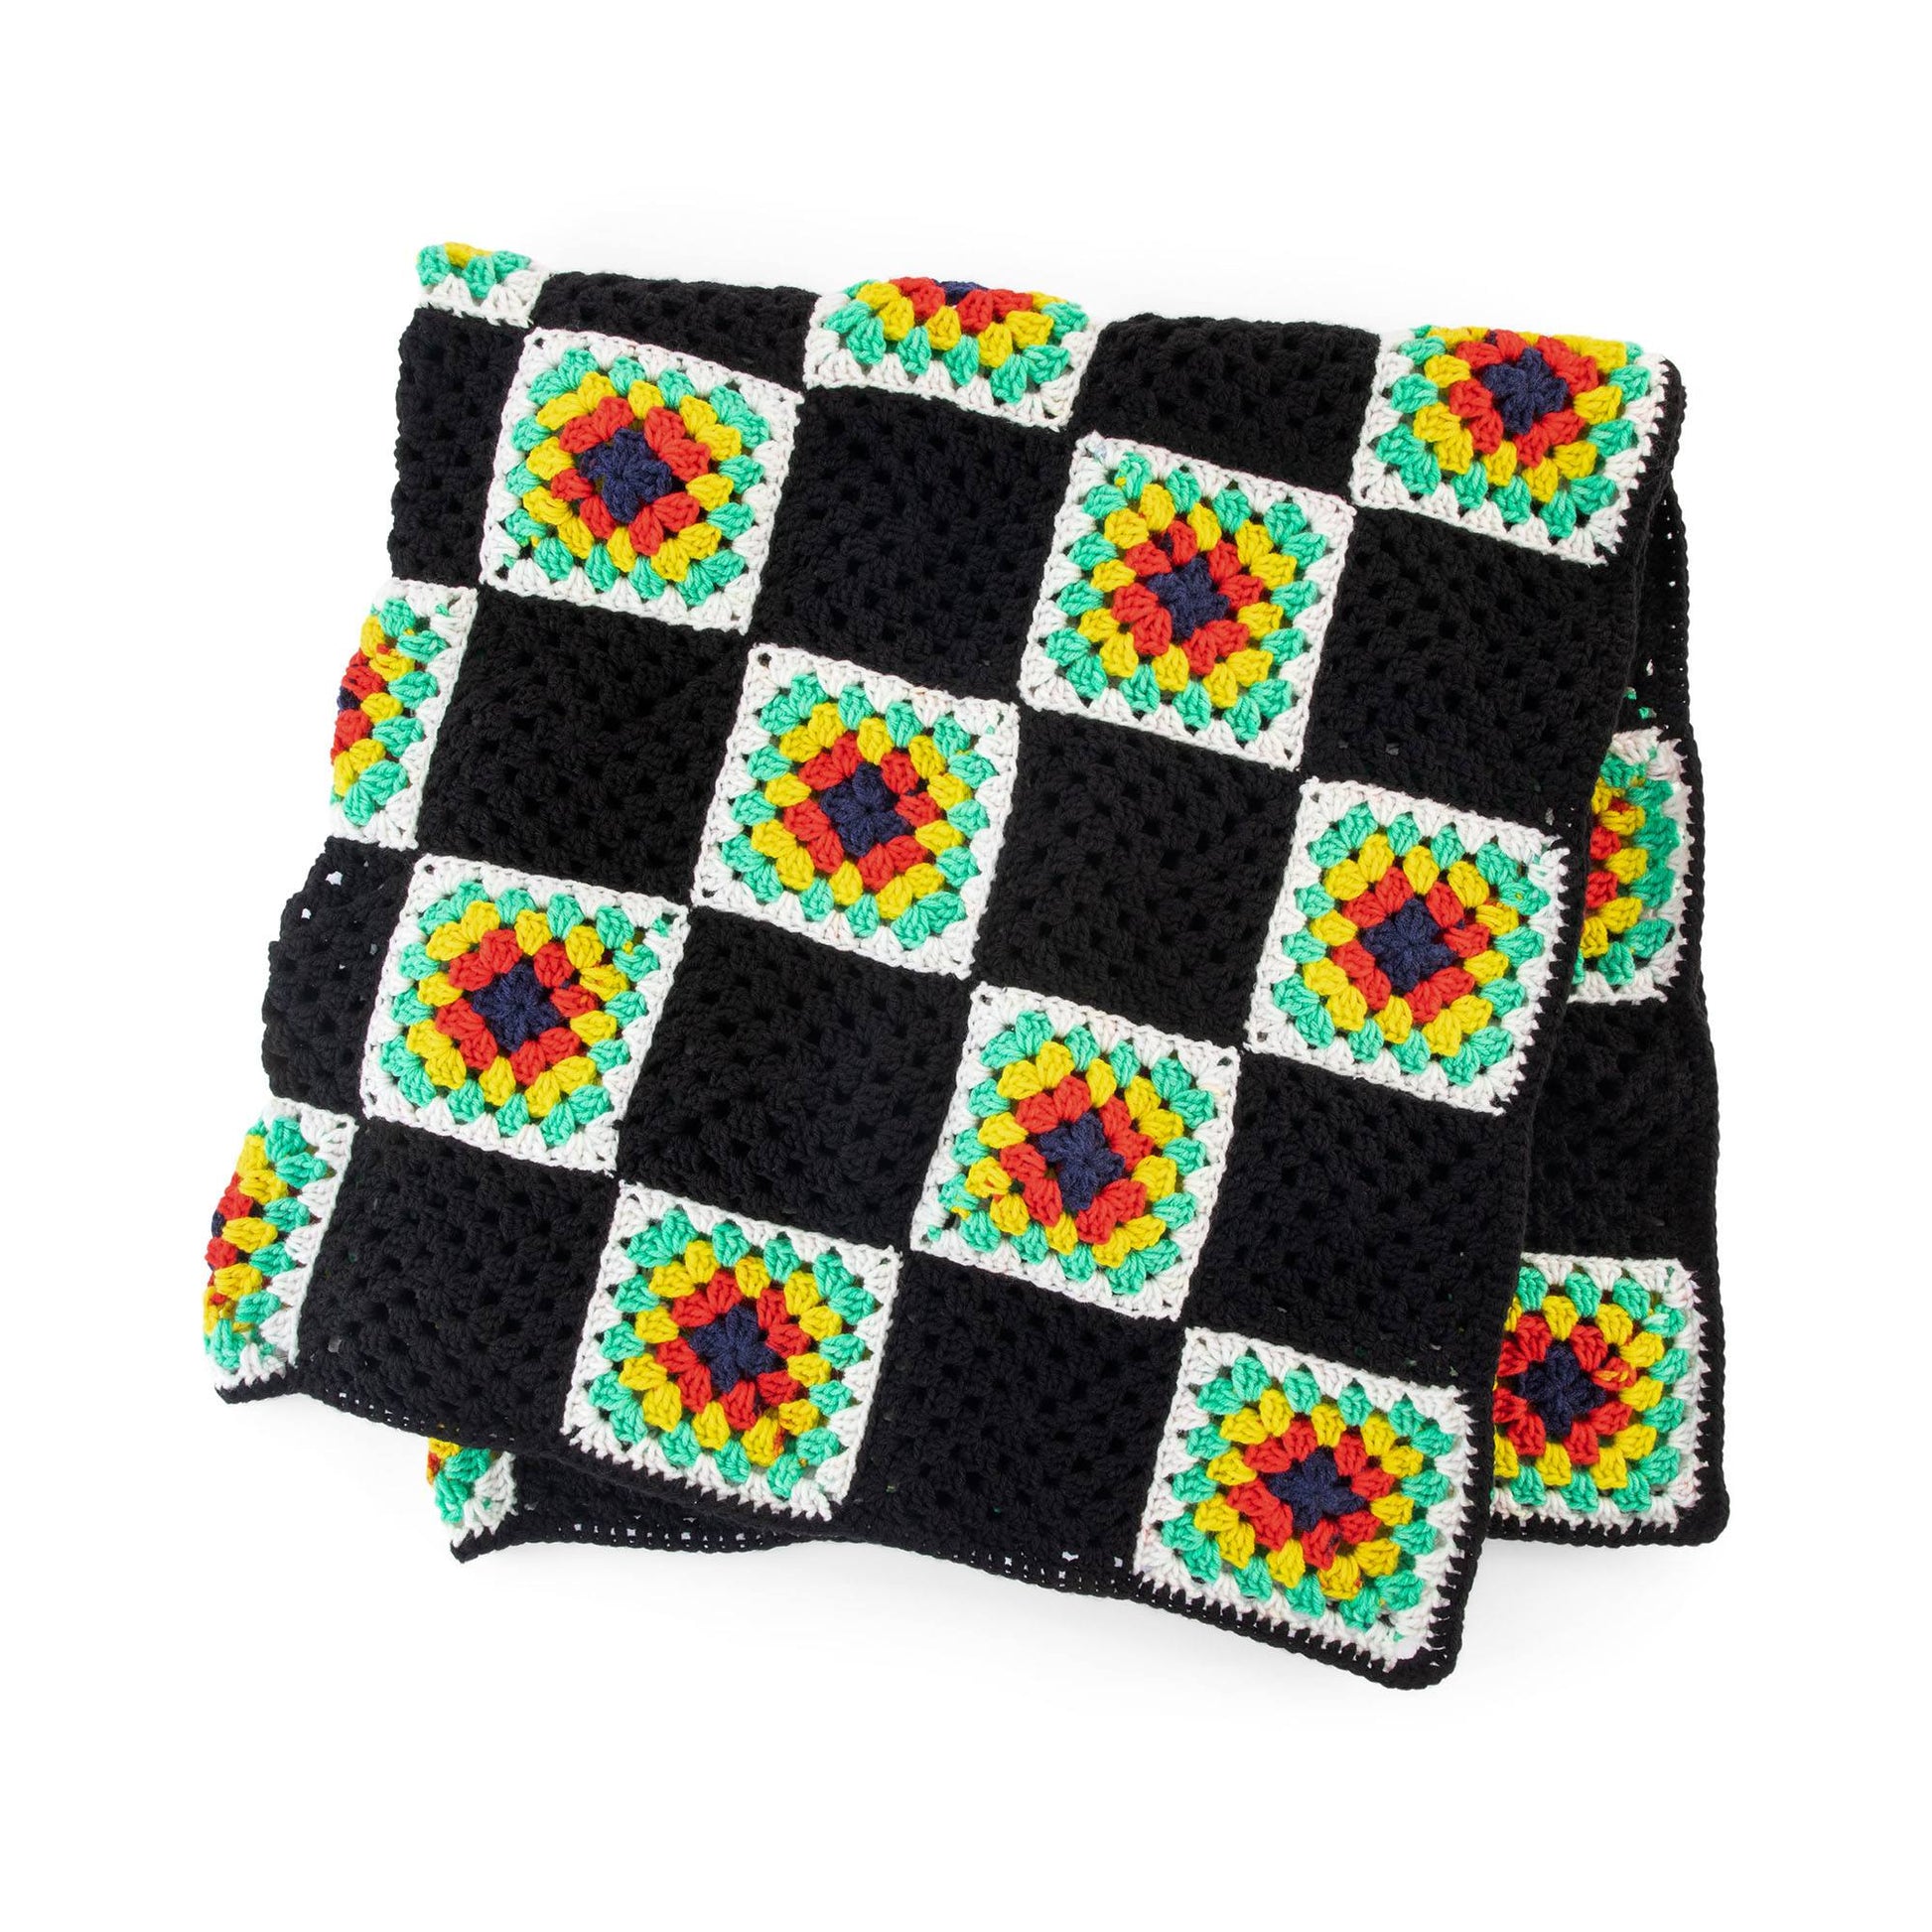 Free Red Heart Checkered Granny Square Crochet Blanket Pattern